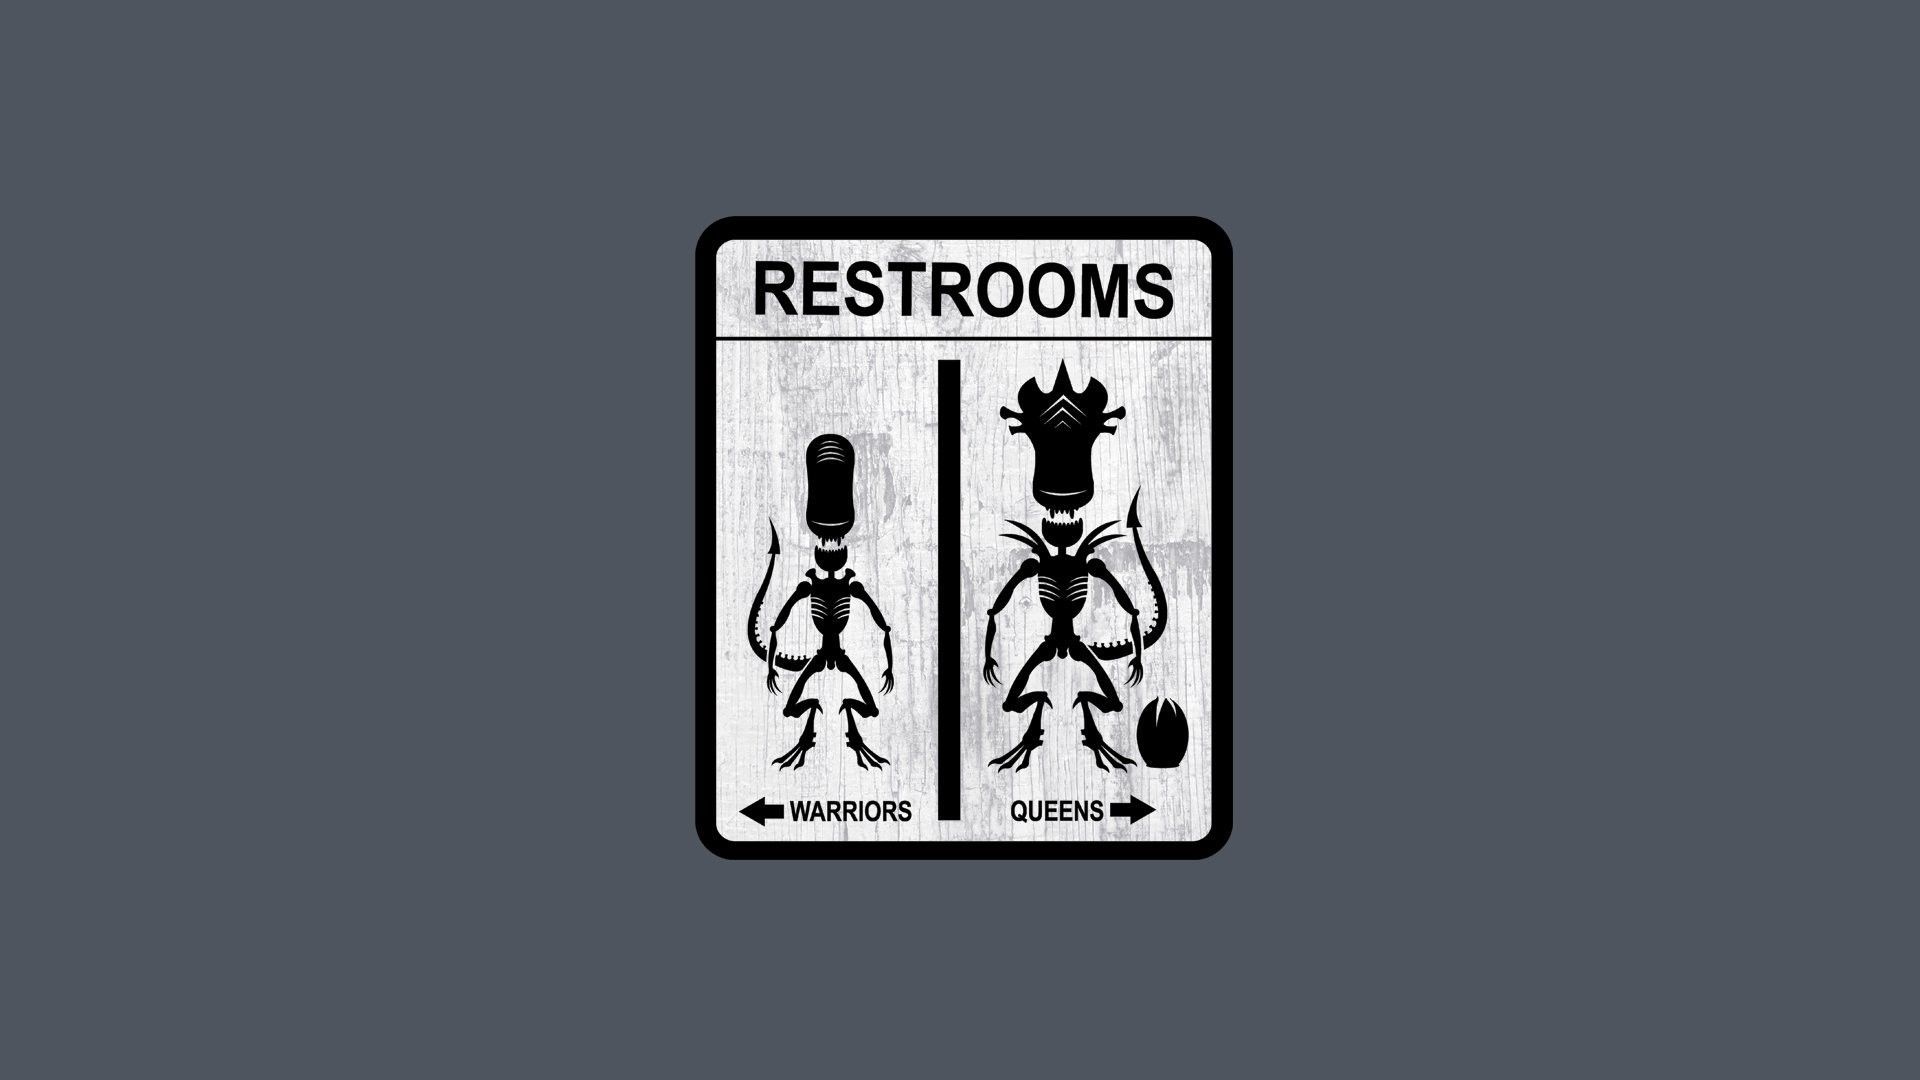 A restroom sign with two alien creatures on it, one says 